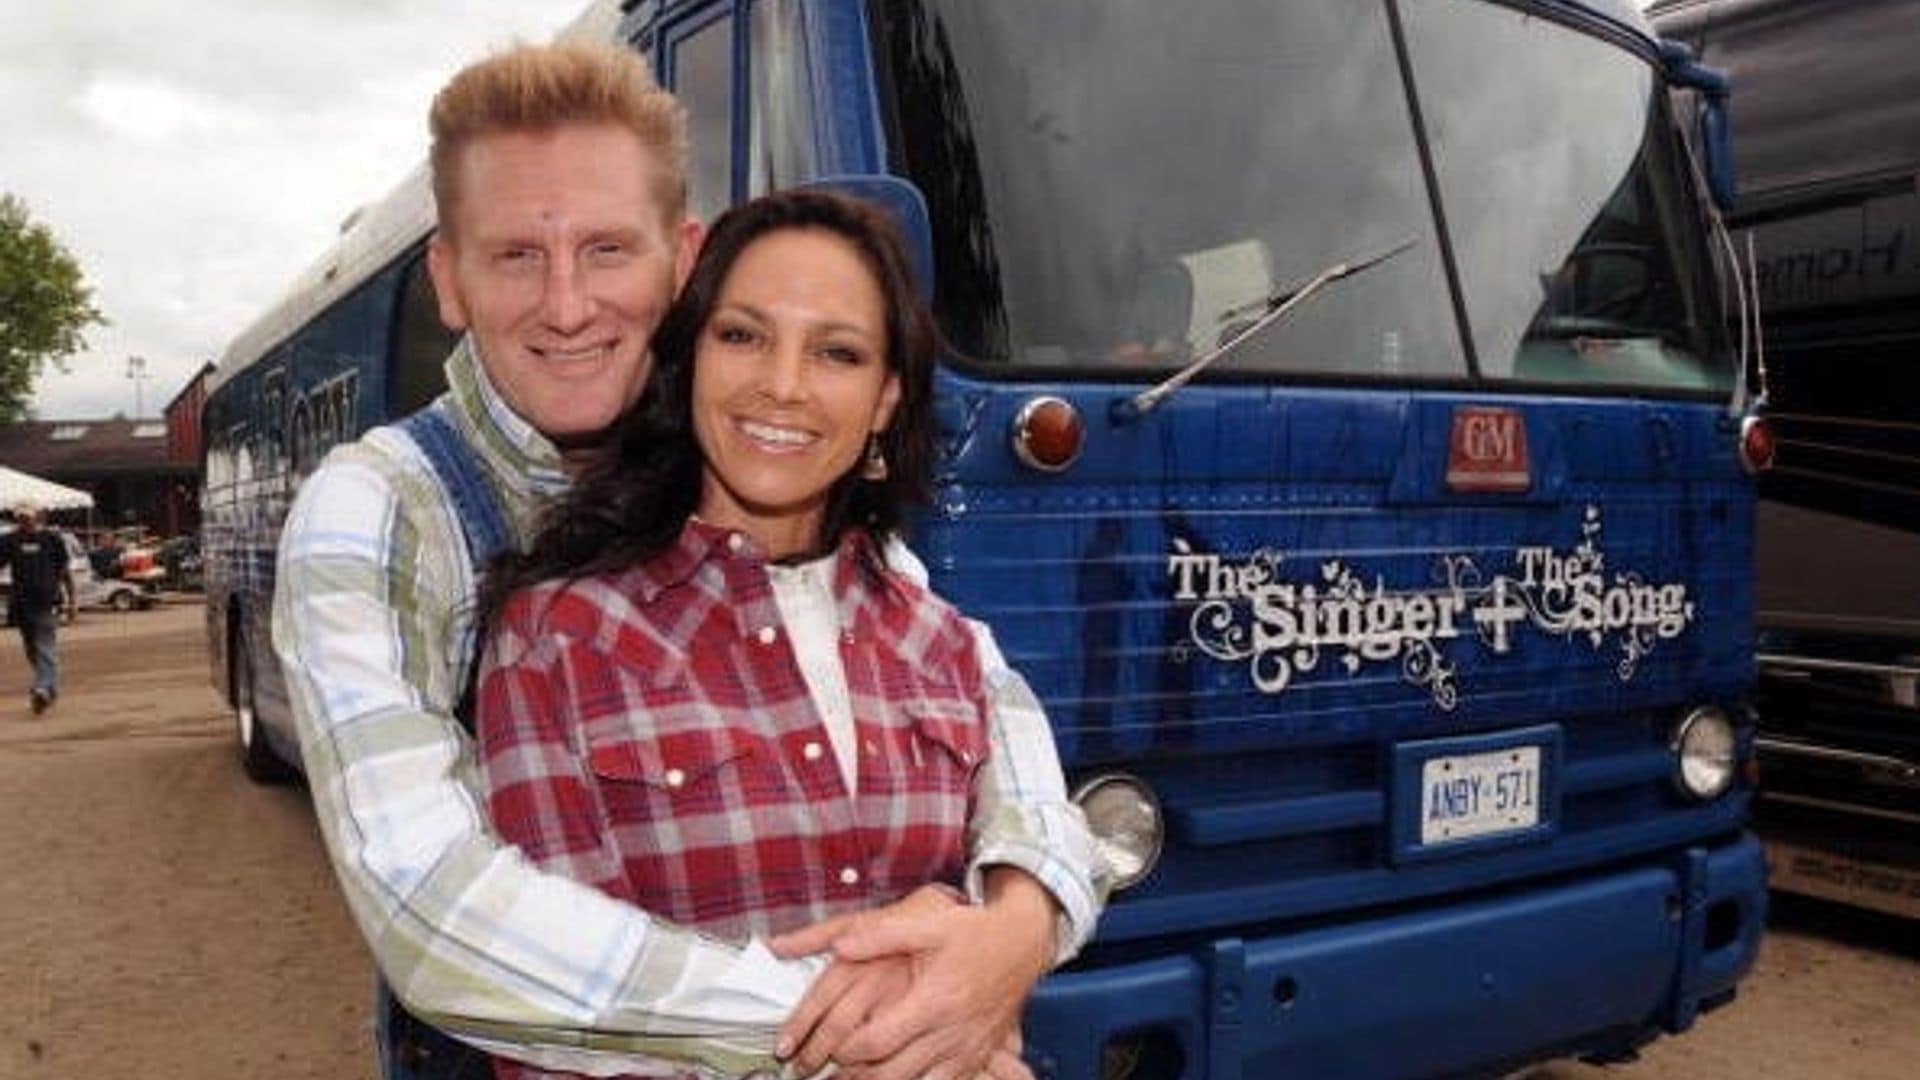 Joey Feek's wish is to be alive for Christmas and her daughter's birthday